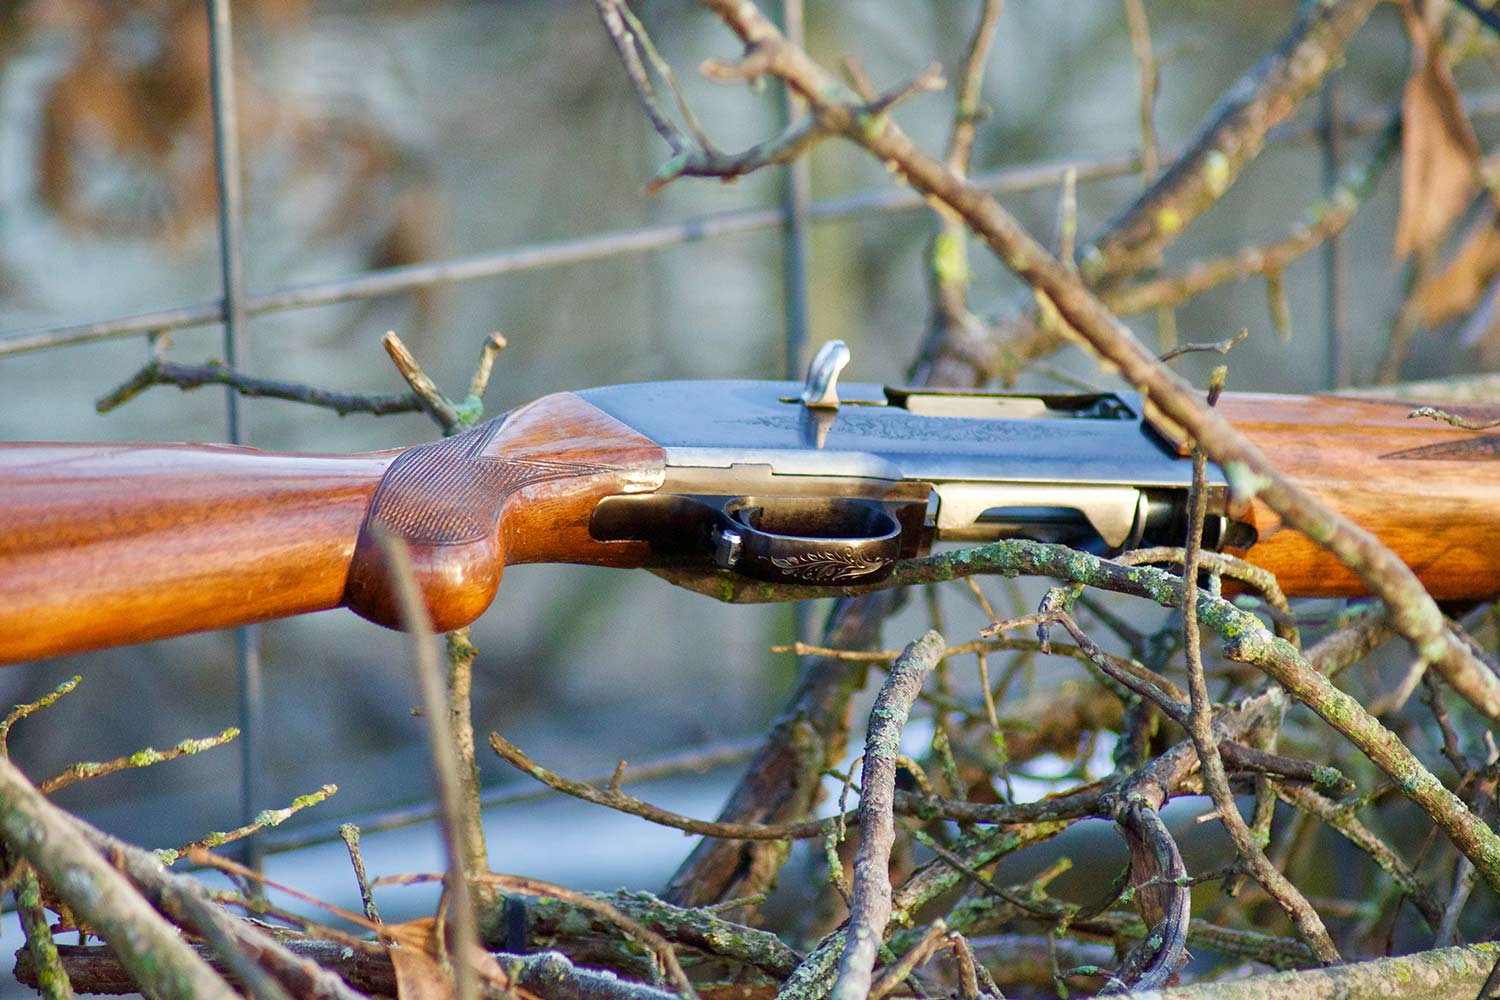 A Browning Double Auto shotgun amgon branches and twigs.